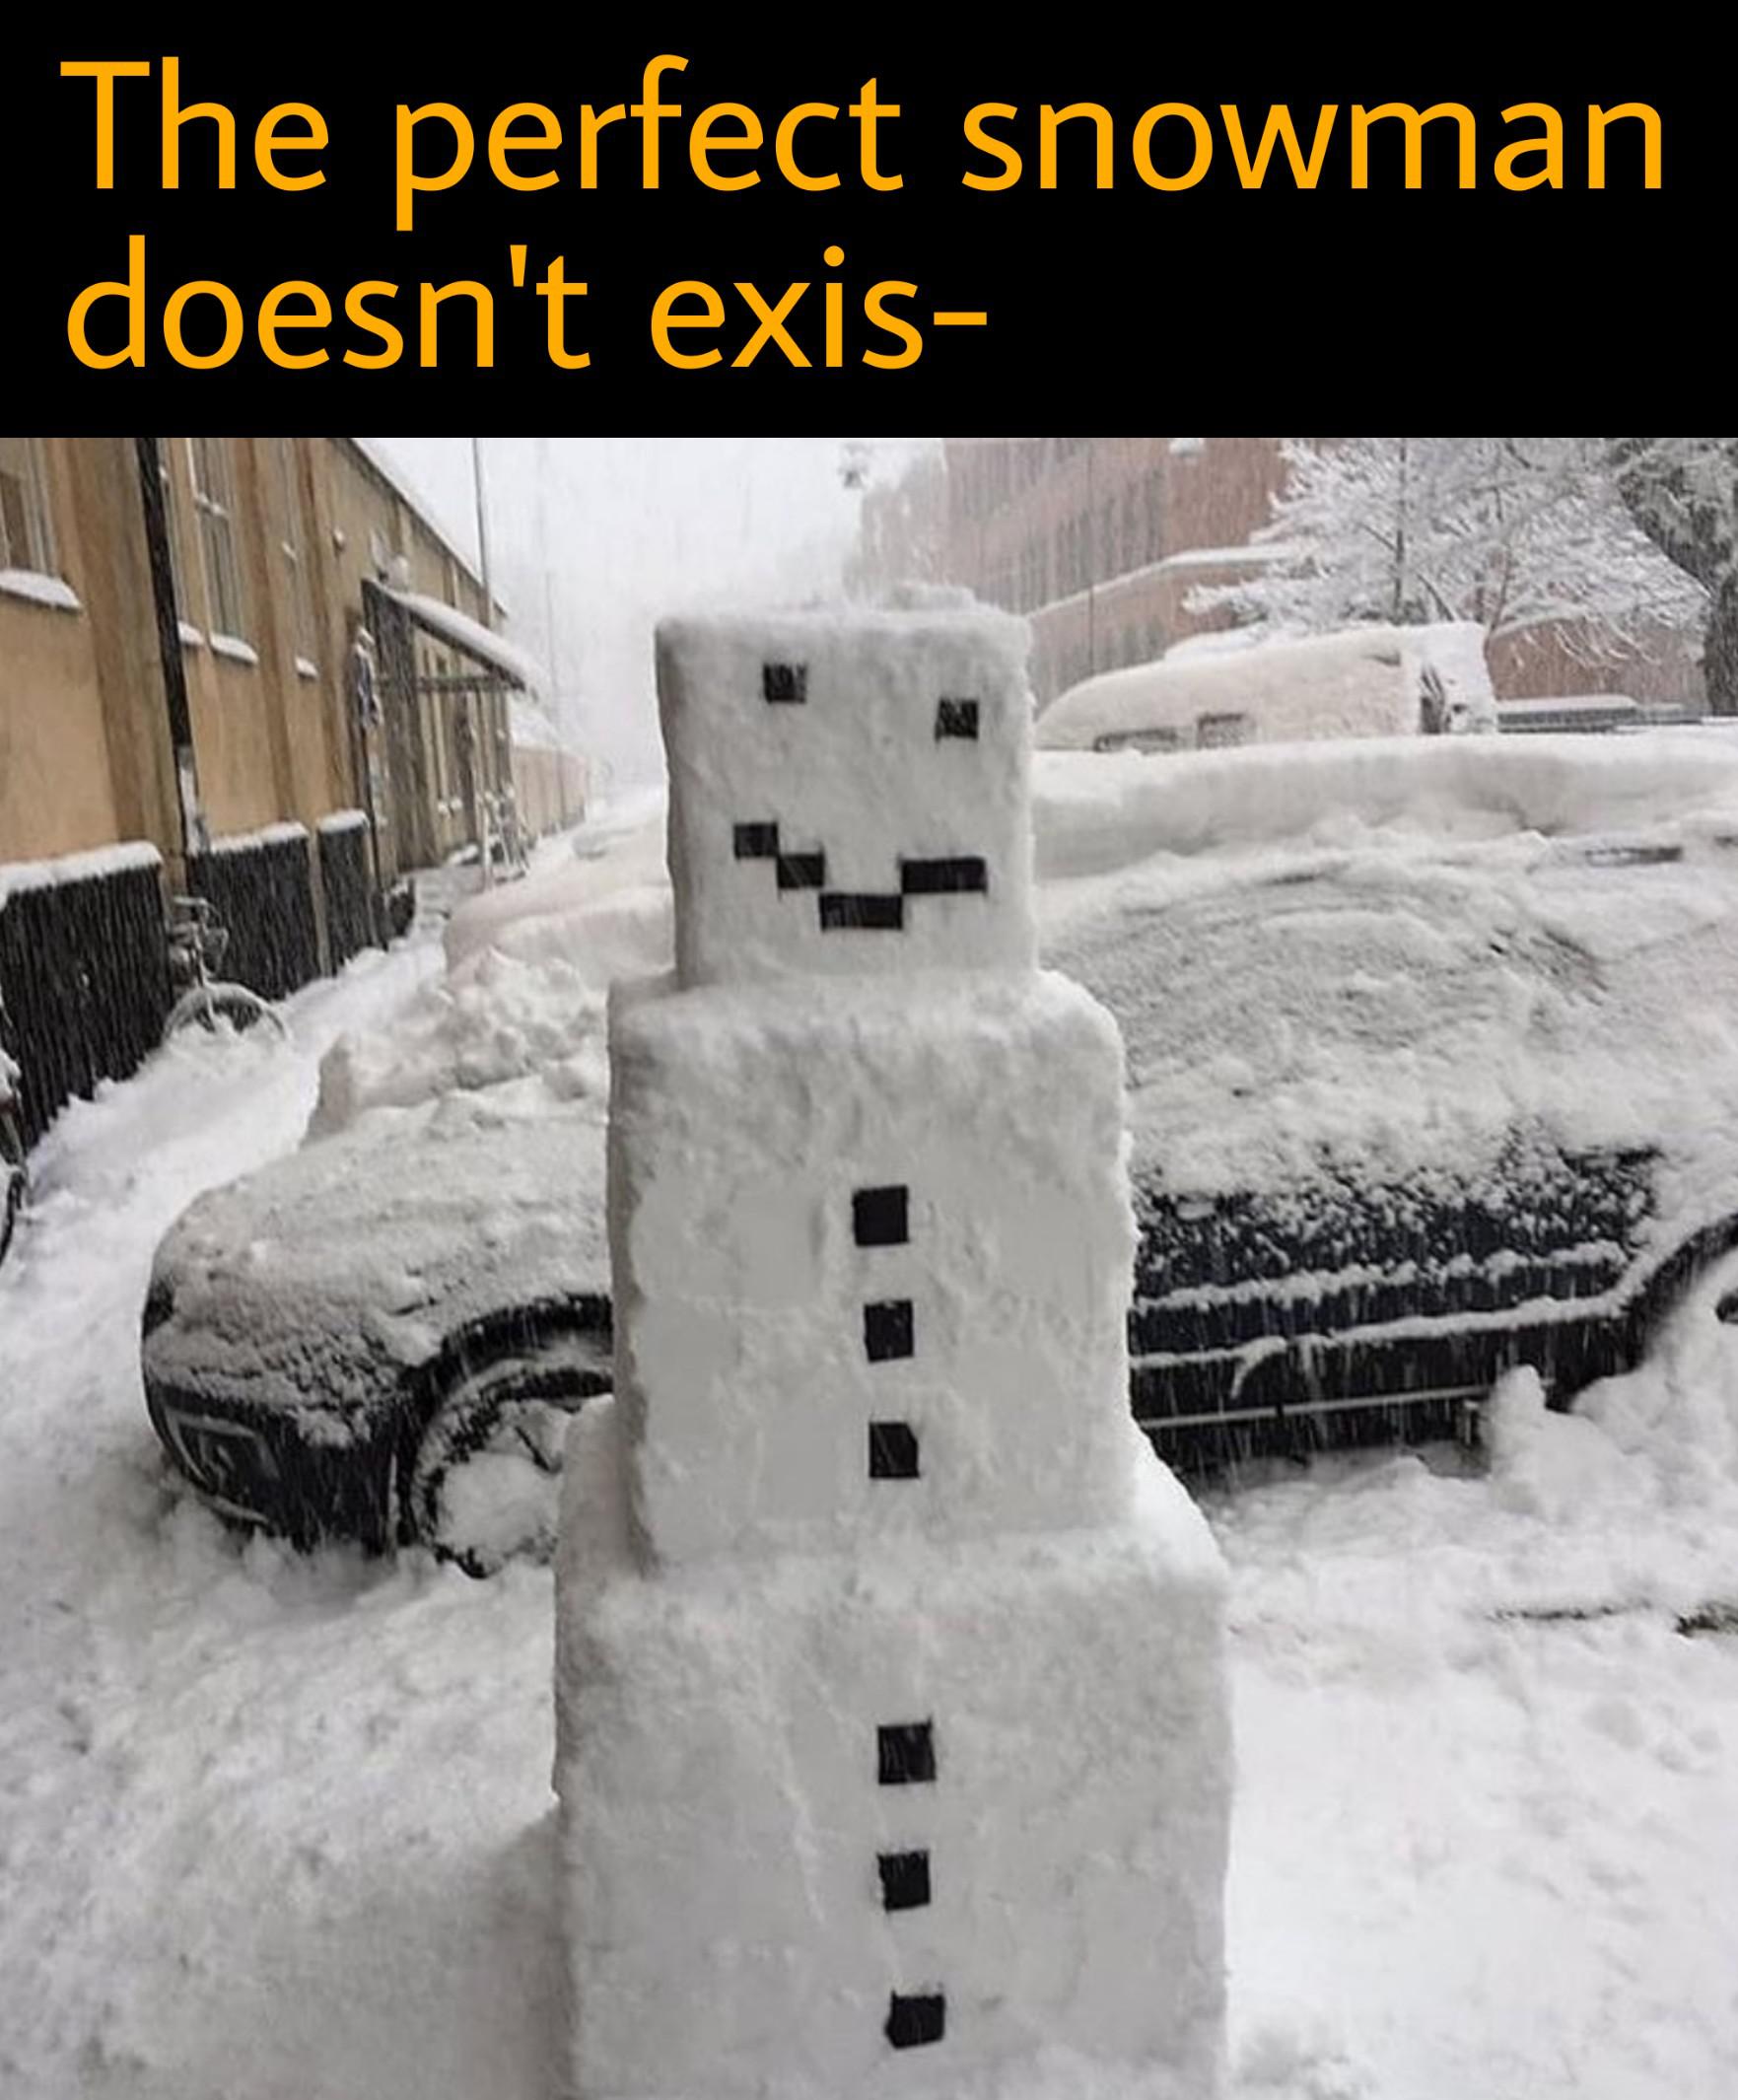 dank memes - minecraft snowman in real life - The perfect snowman doesn't exis